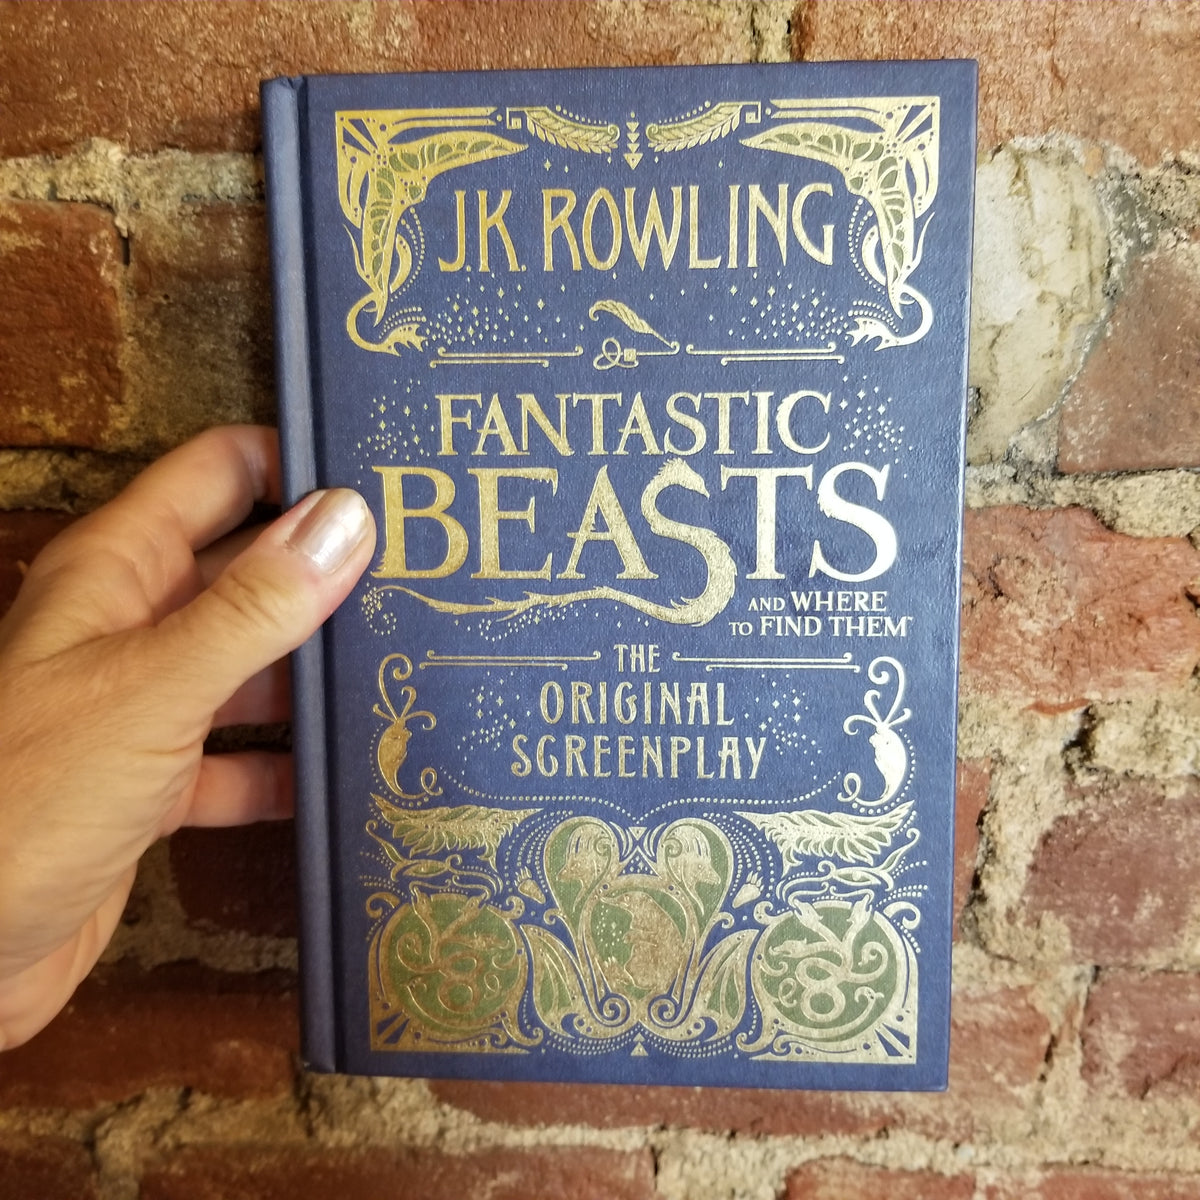 Fantastic Beasts & Where to Find Them – Book & Screenplay Review